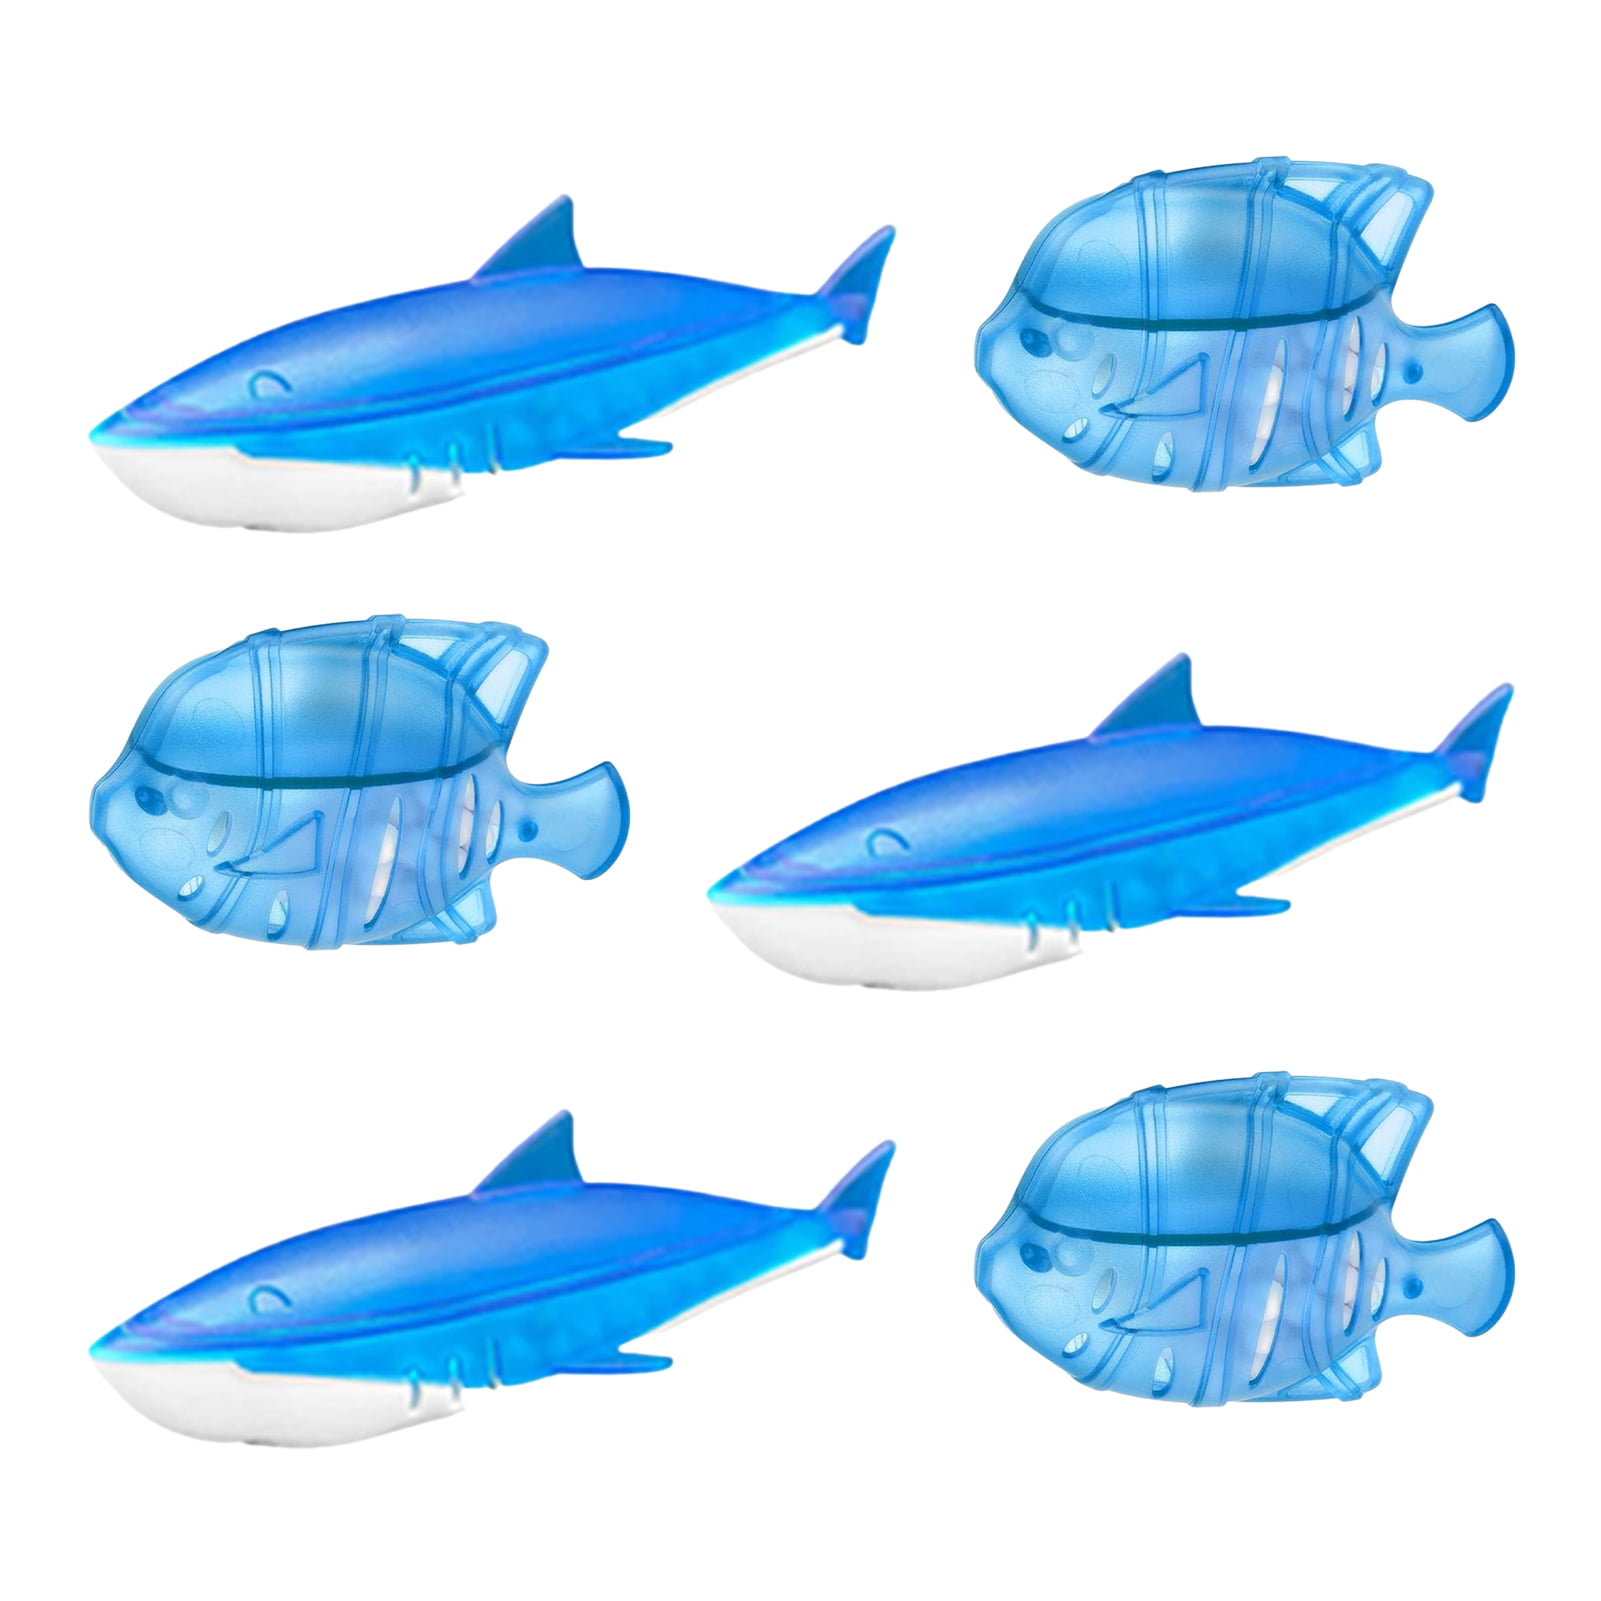 Eliminates White Dust and Reduce Odor 6Pack Prevents Hard Water Build-Up Demineralization Float Shark & Fish Compatible with All Humidifier and Fish Tank Leemone Humidifier Cleaner Shark & Fish 